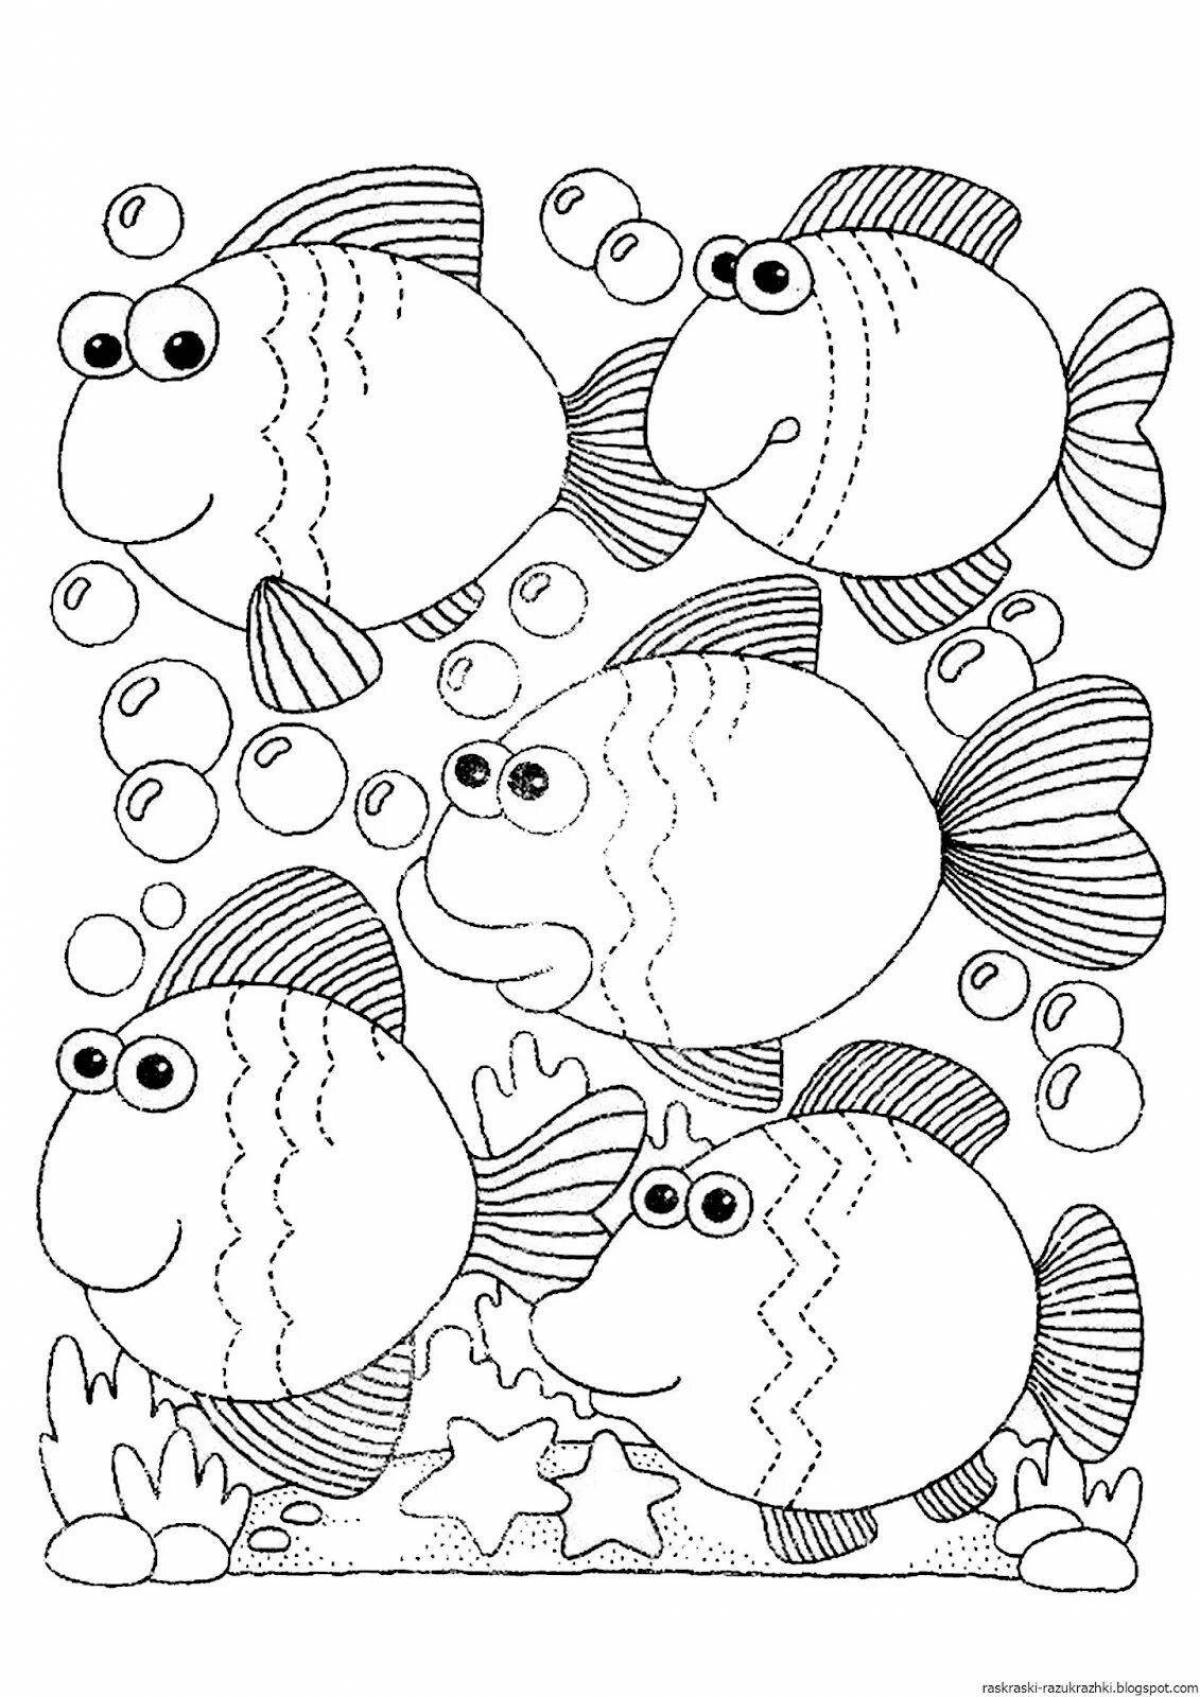 Tempting coloring page of motor skills